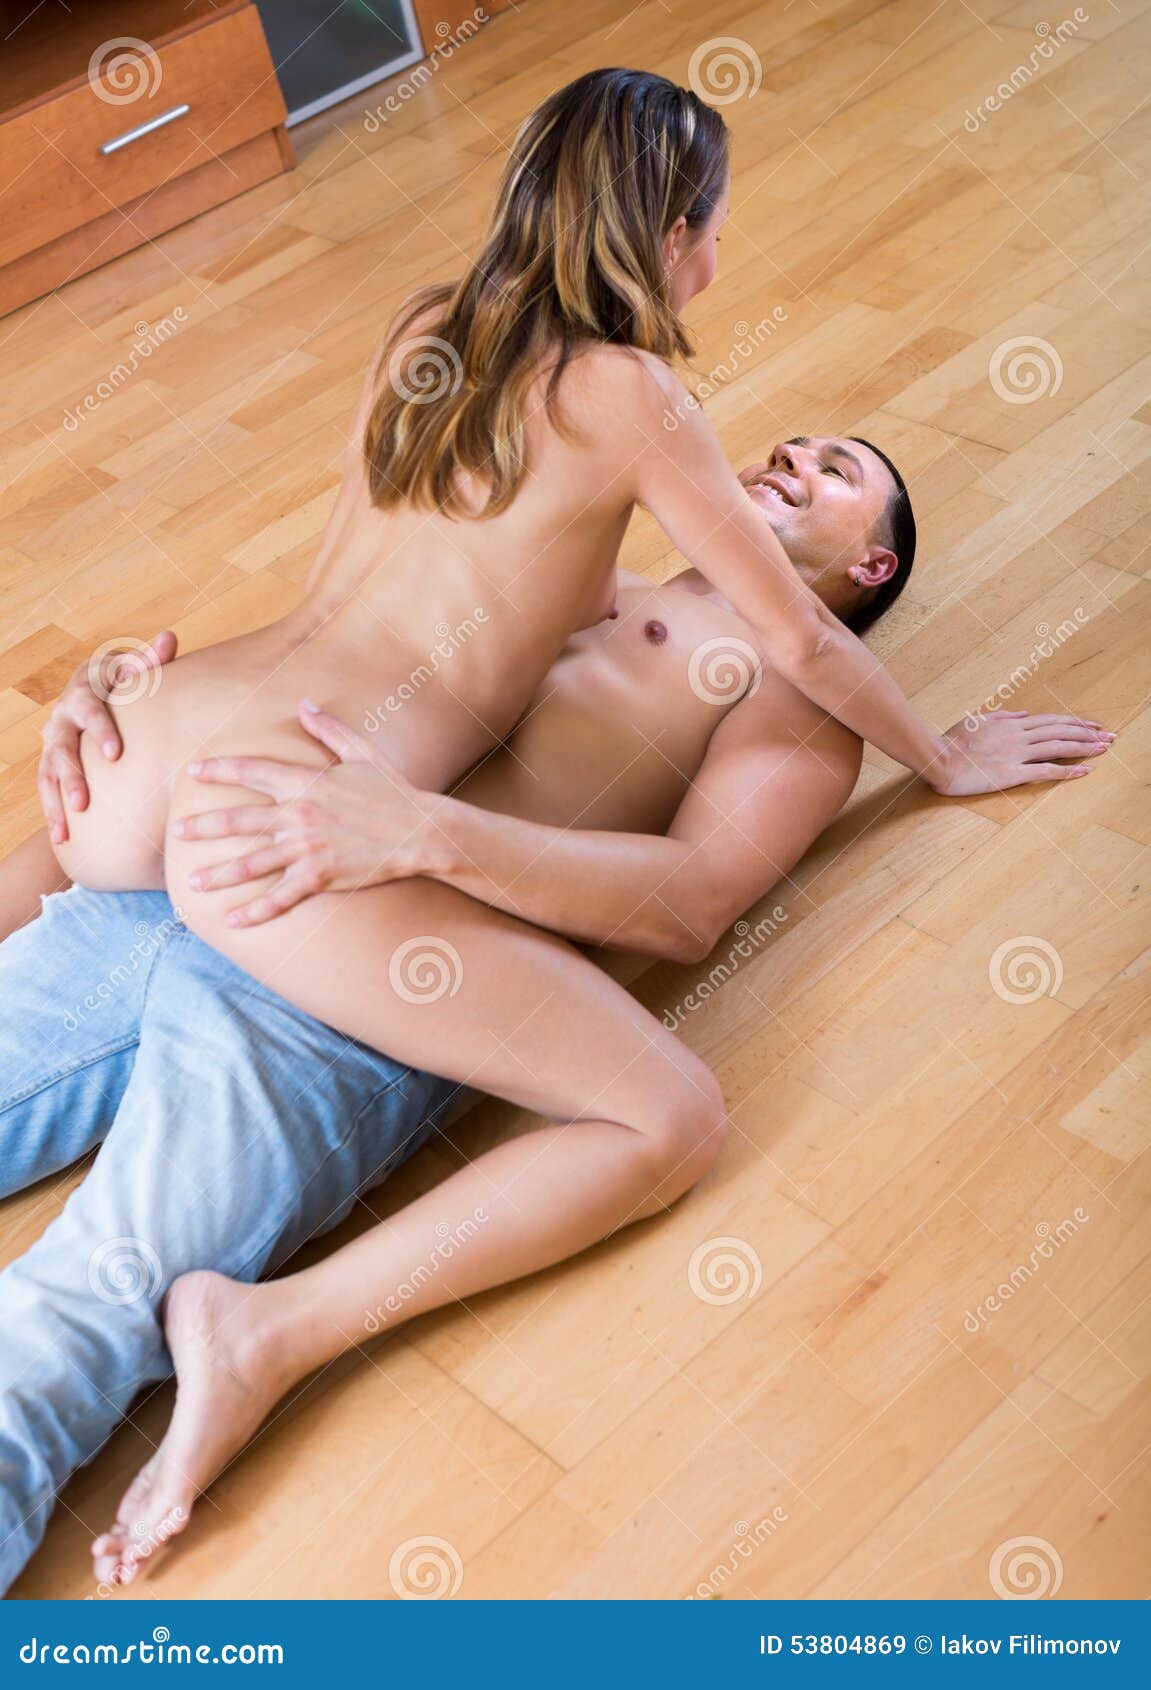 Woman and Man Making Love Indoor Stock Image - Image of female, couple:  53804869